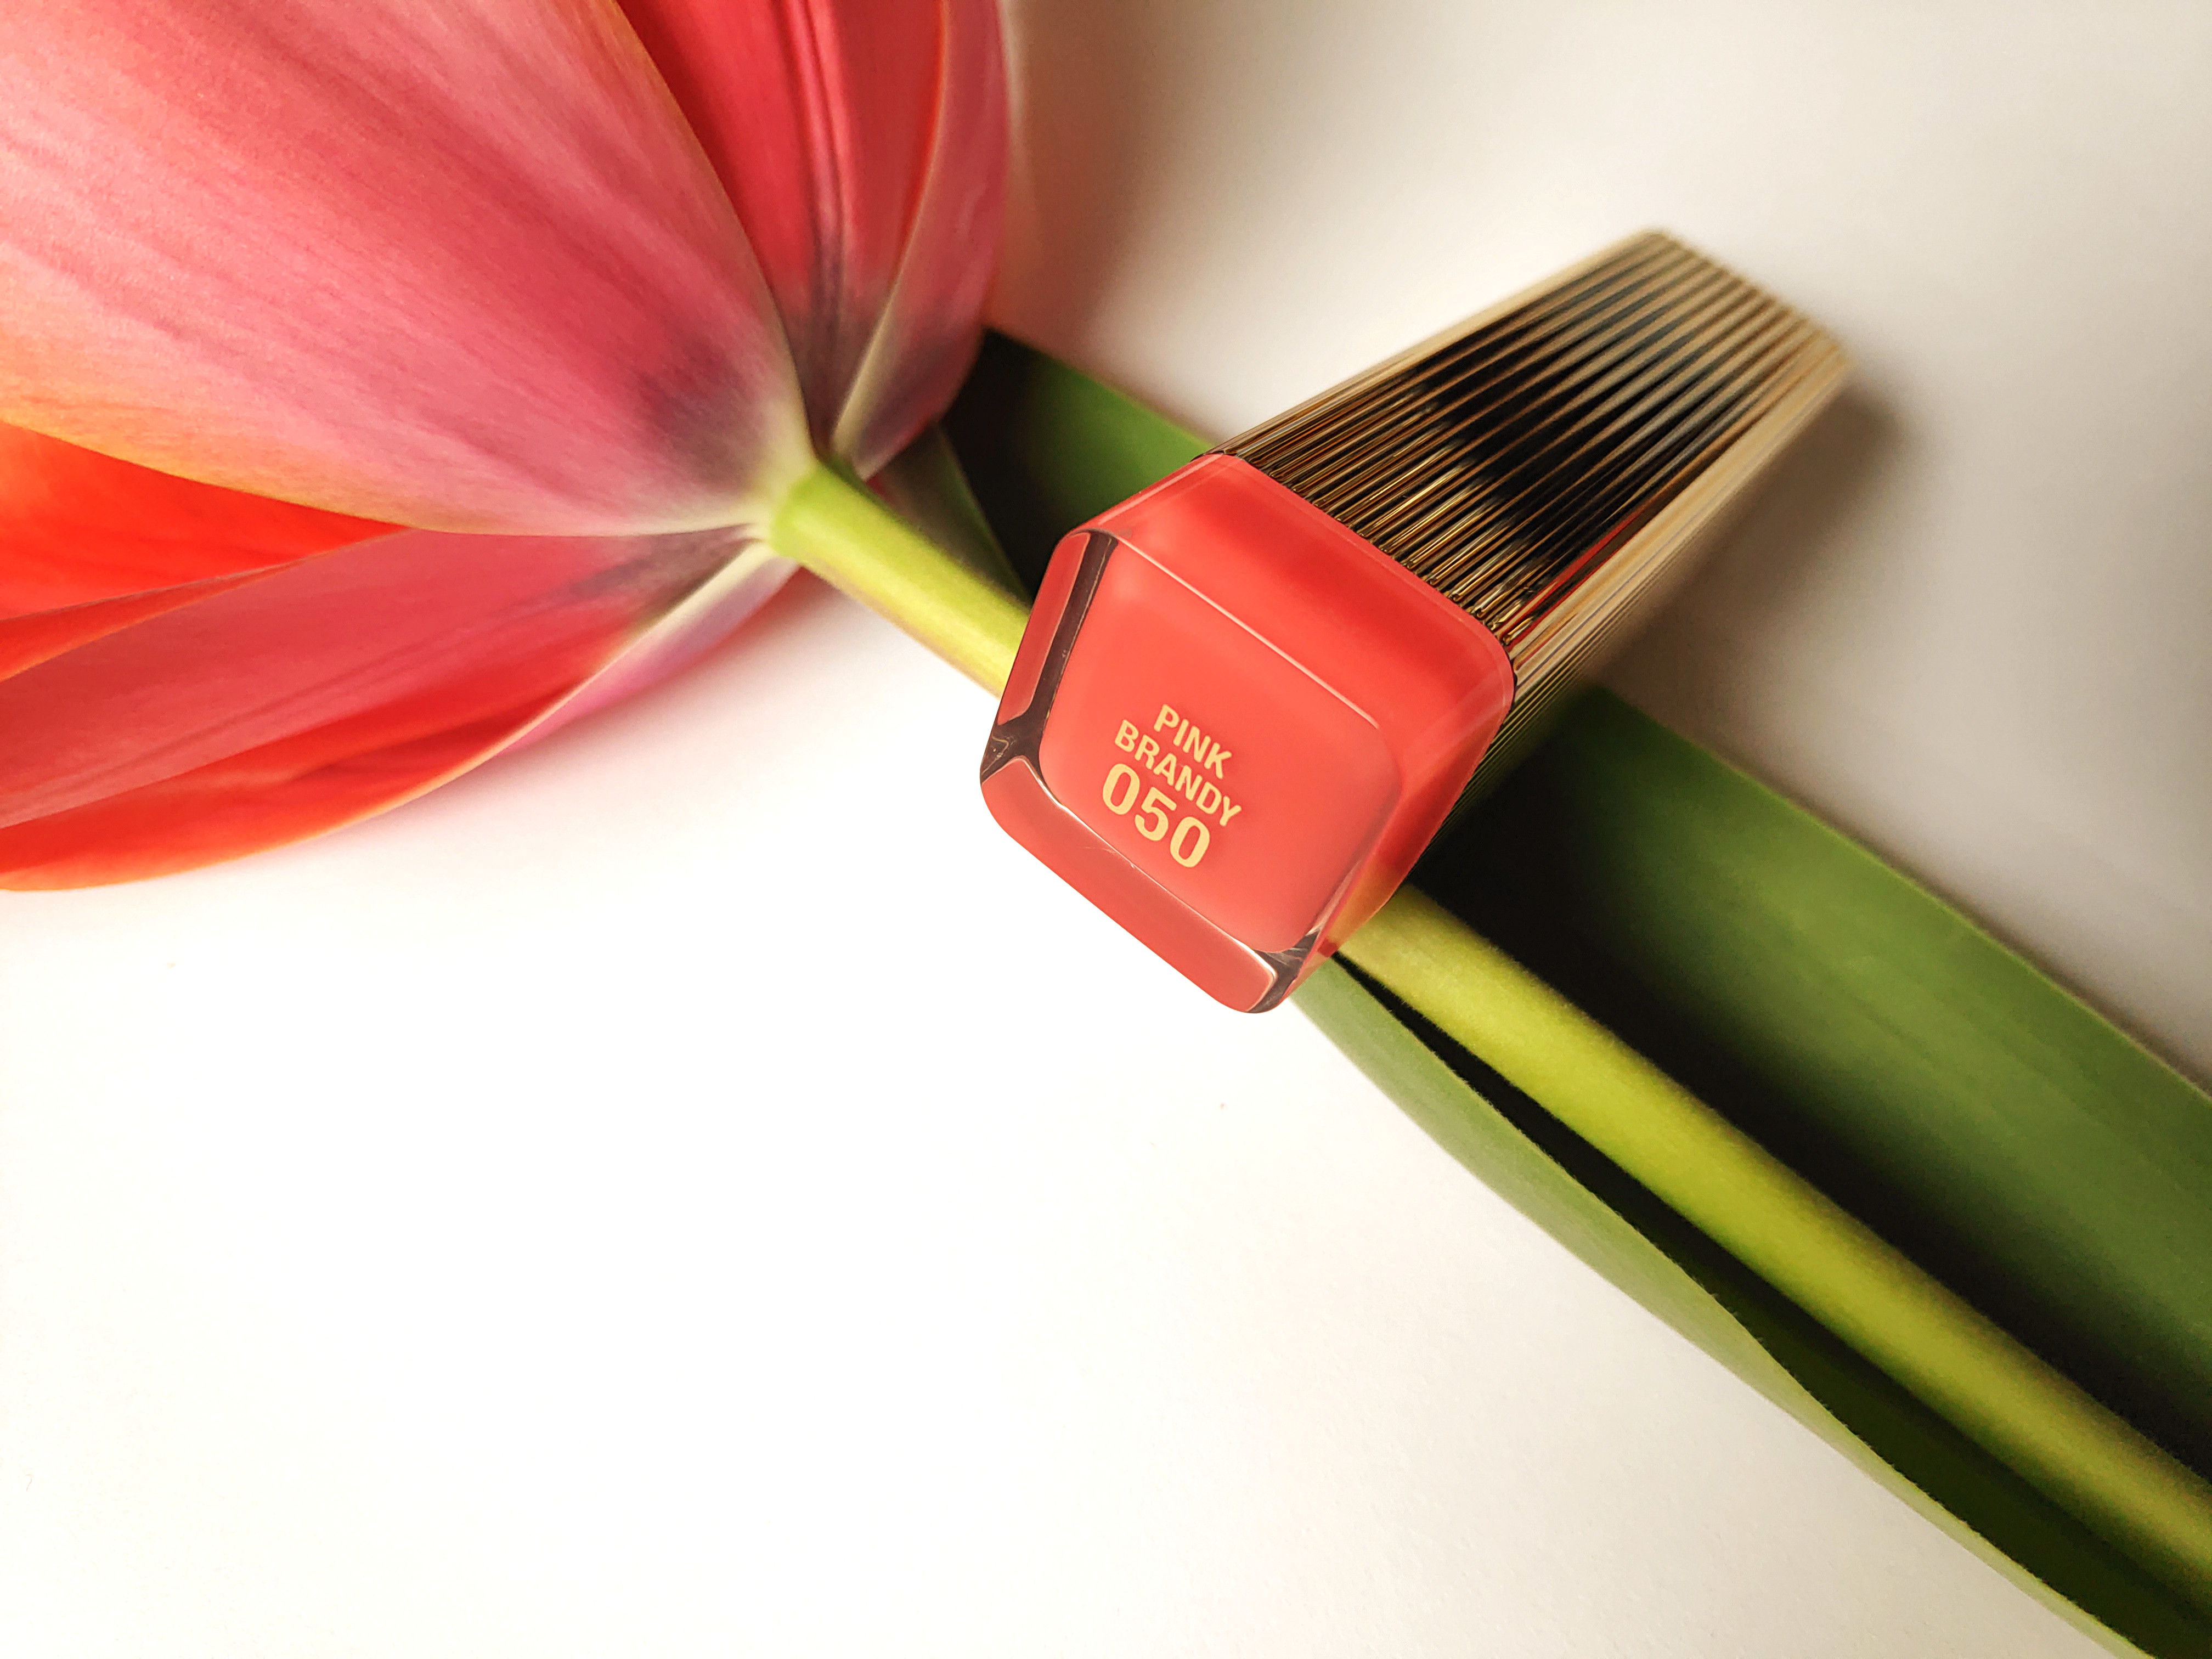 Max Factor Colour Elixir Lipstick in 050 Pink Brandy with closed cap, laying on a red tulip with opened petals.